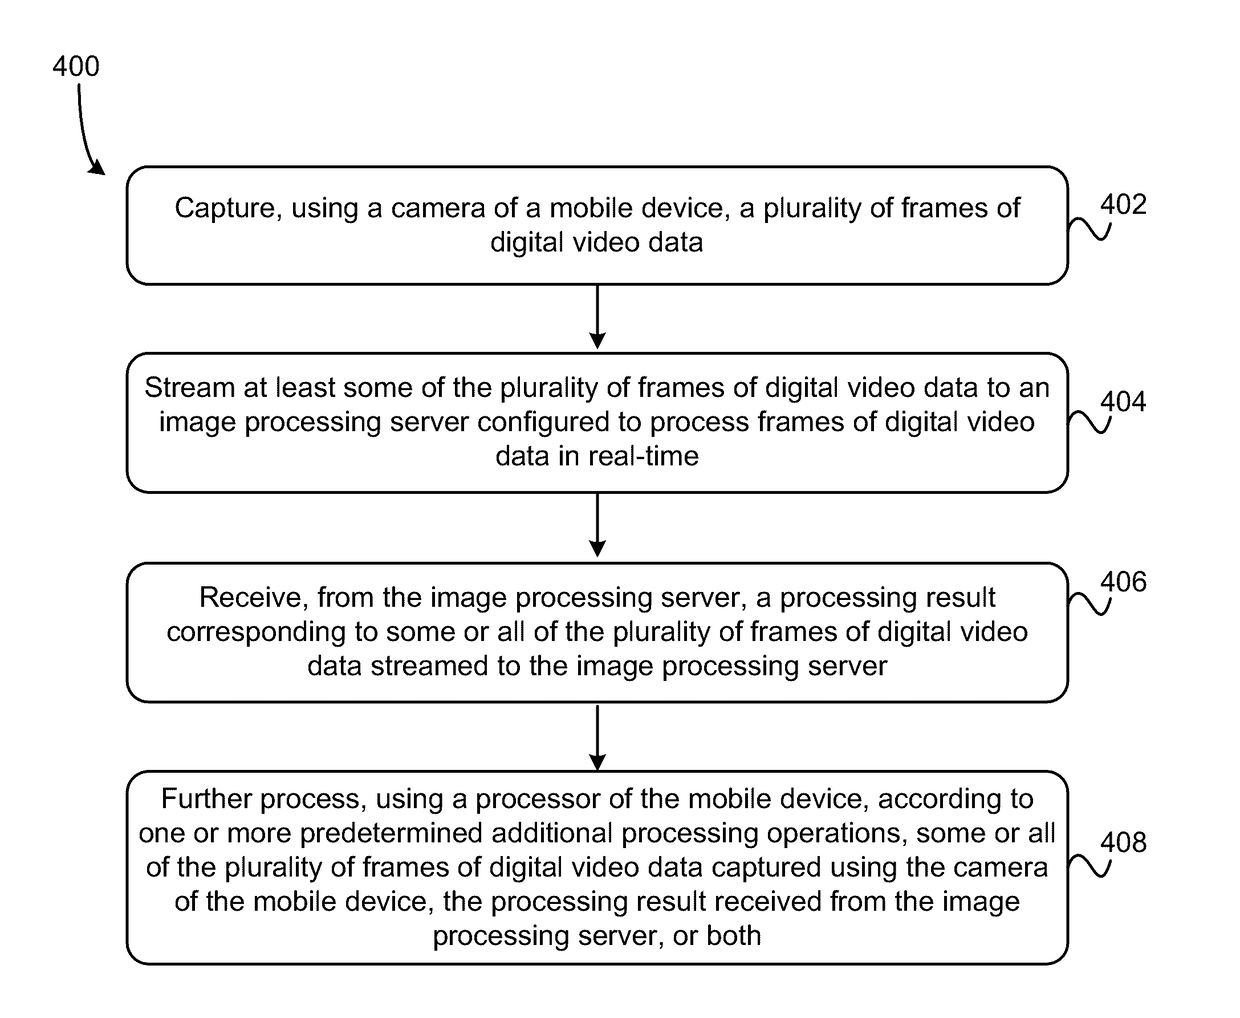 Real-time processing of video streams captured using mobile devices